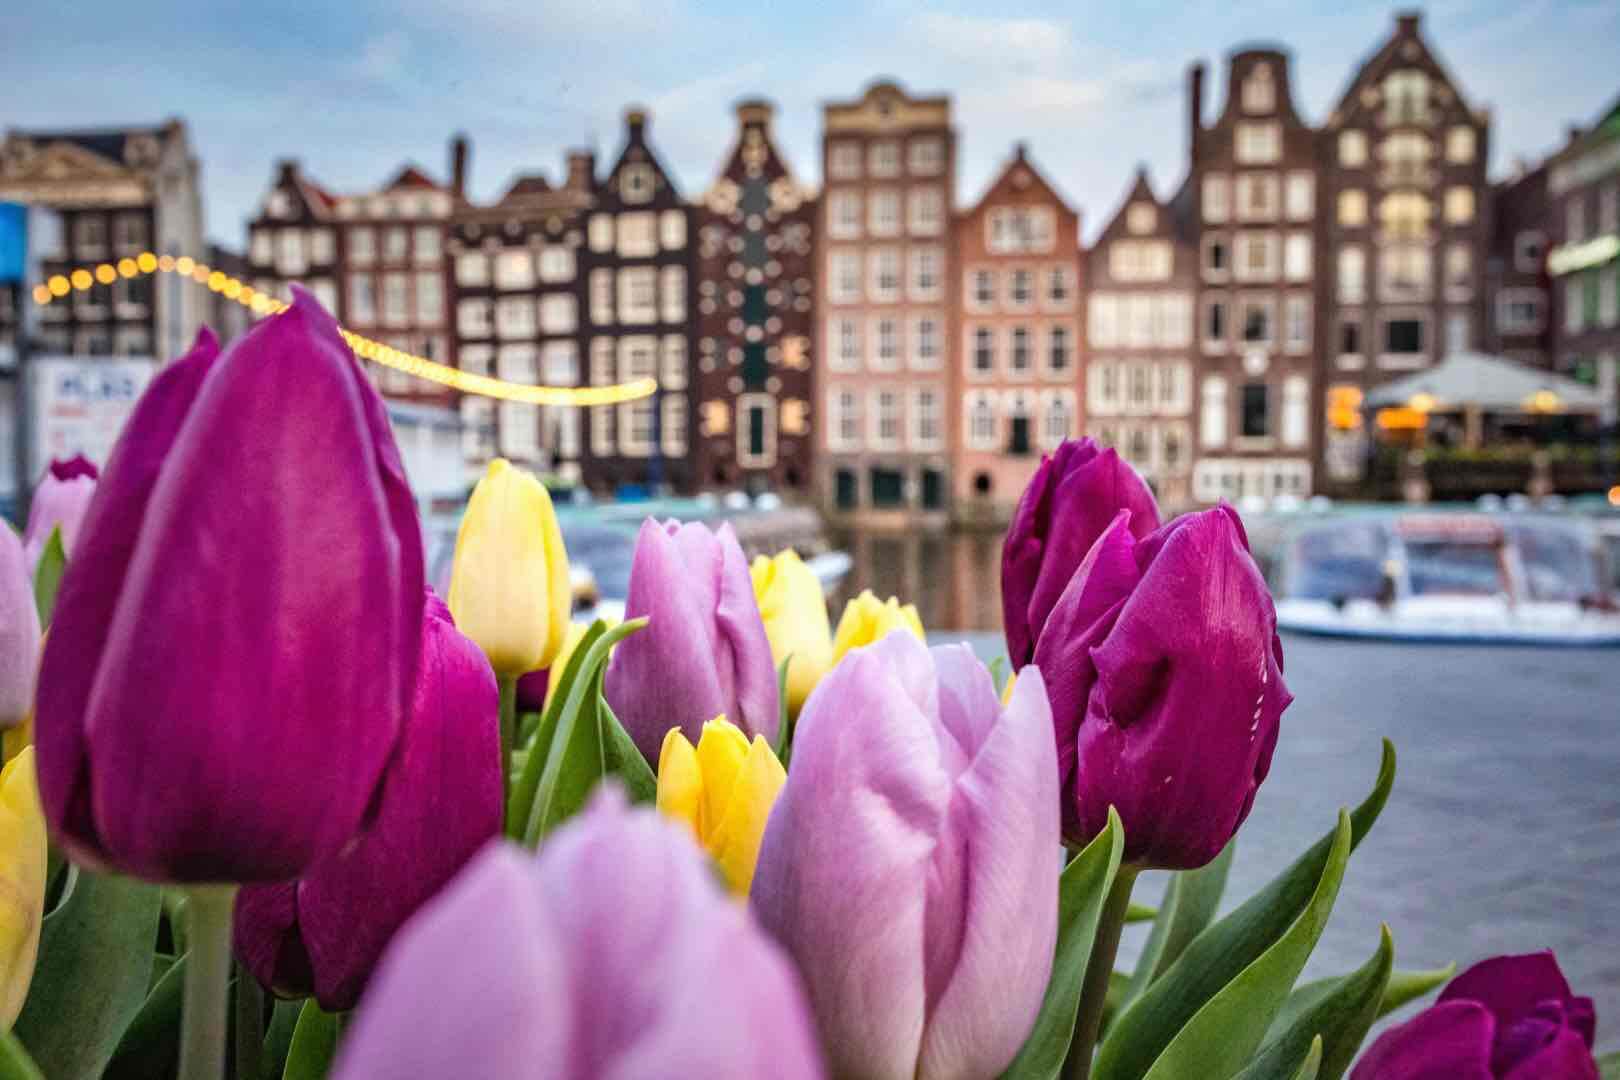 Tulips in Amsterdam.The Netherlands